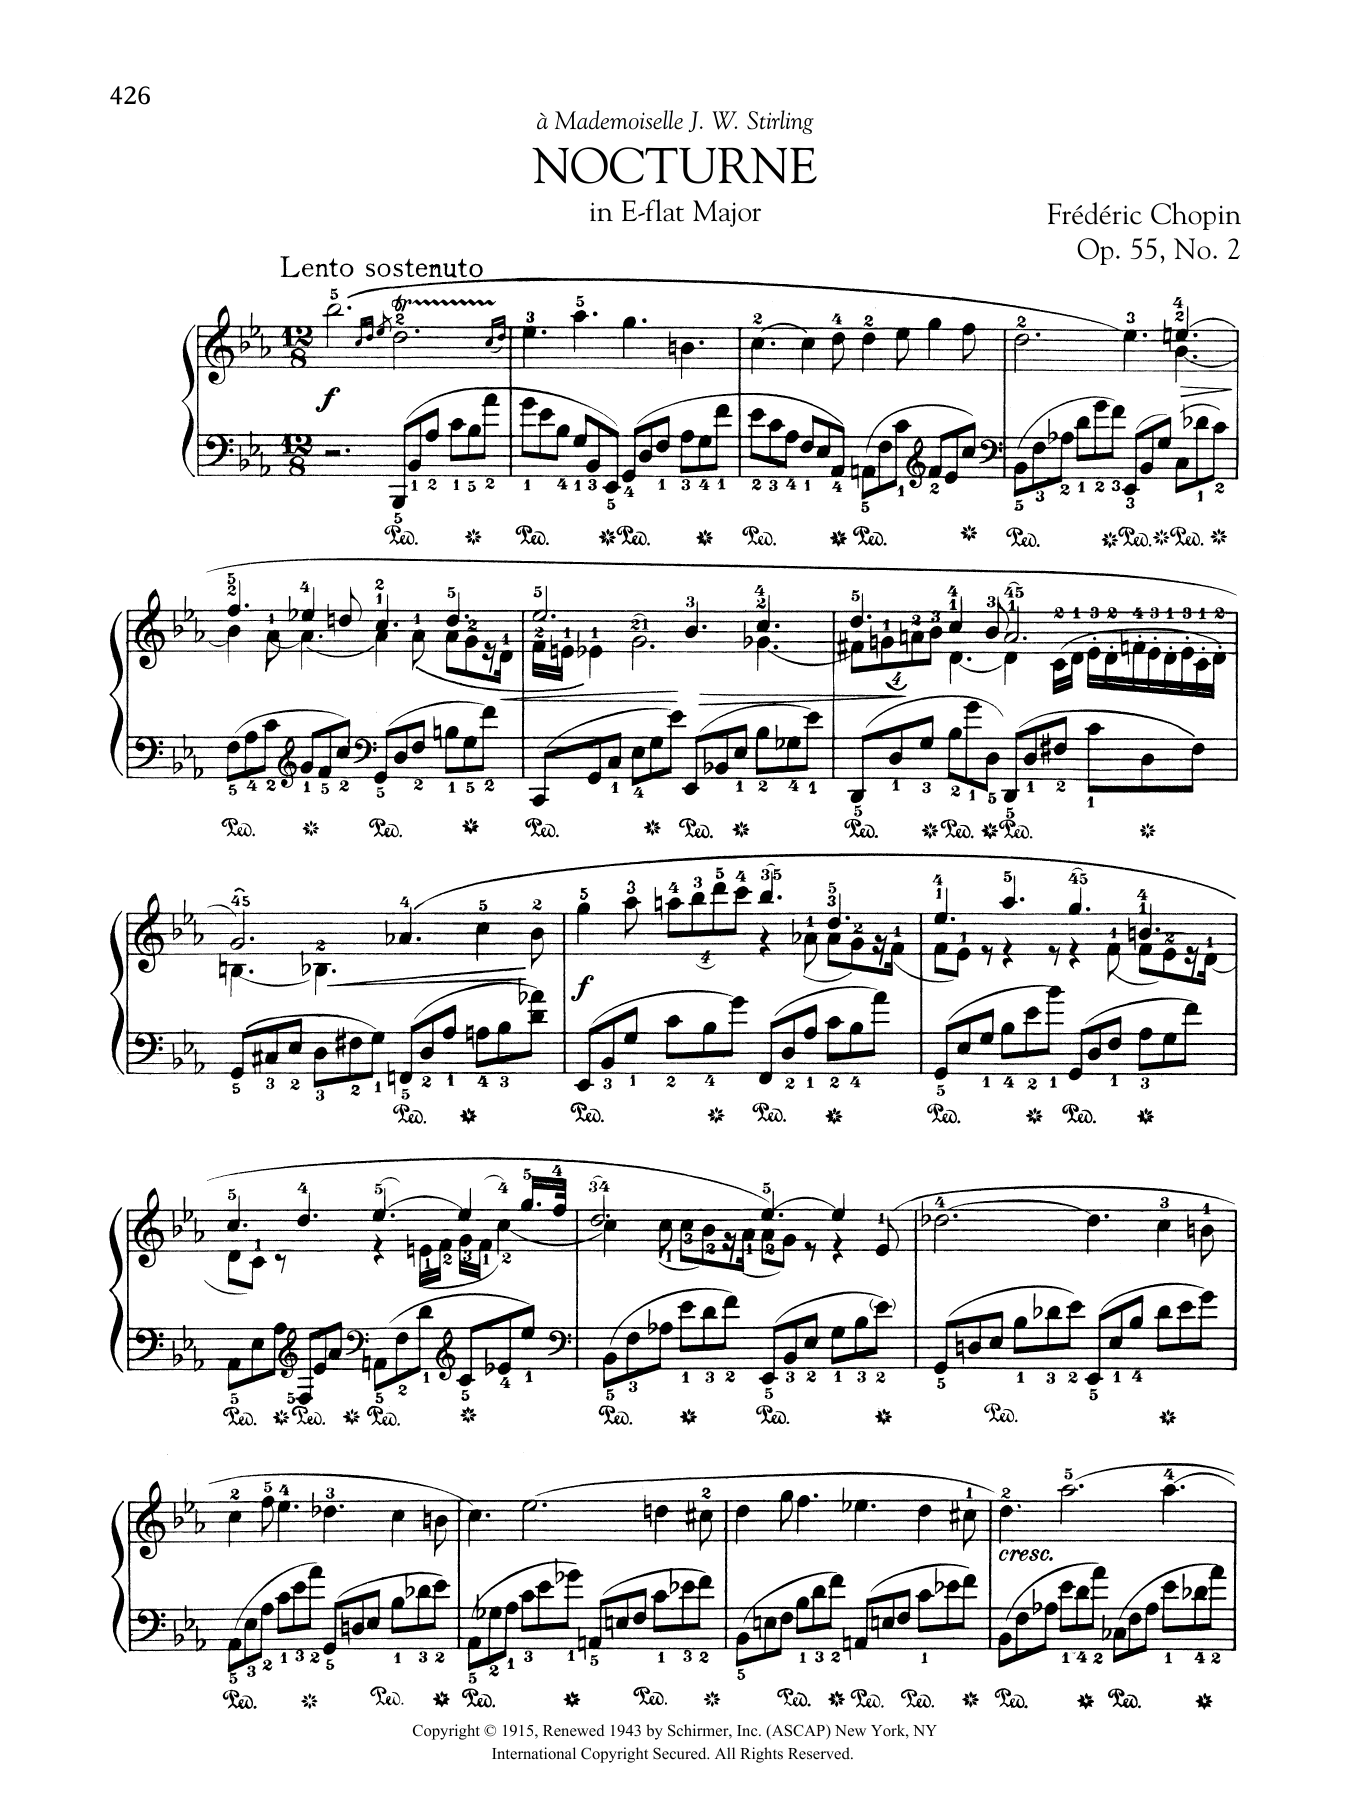 Download Frederic Chopin Nocturne in E-flat Major, Op. 55, No. 2 Sheet Music